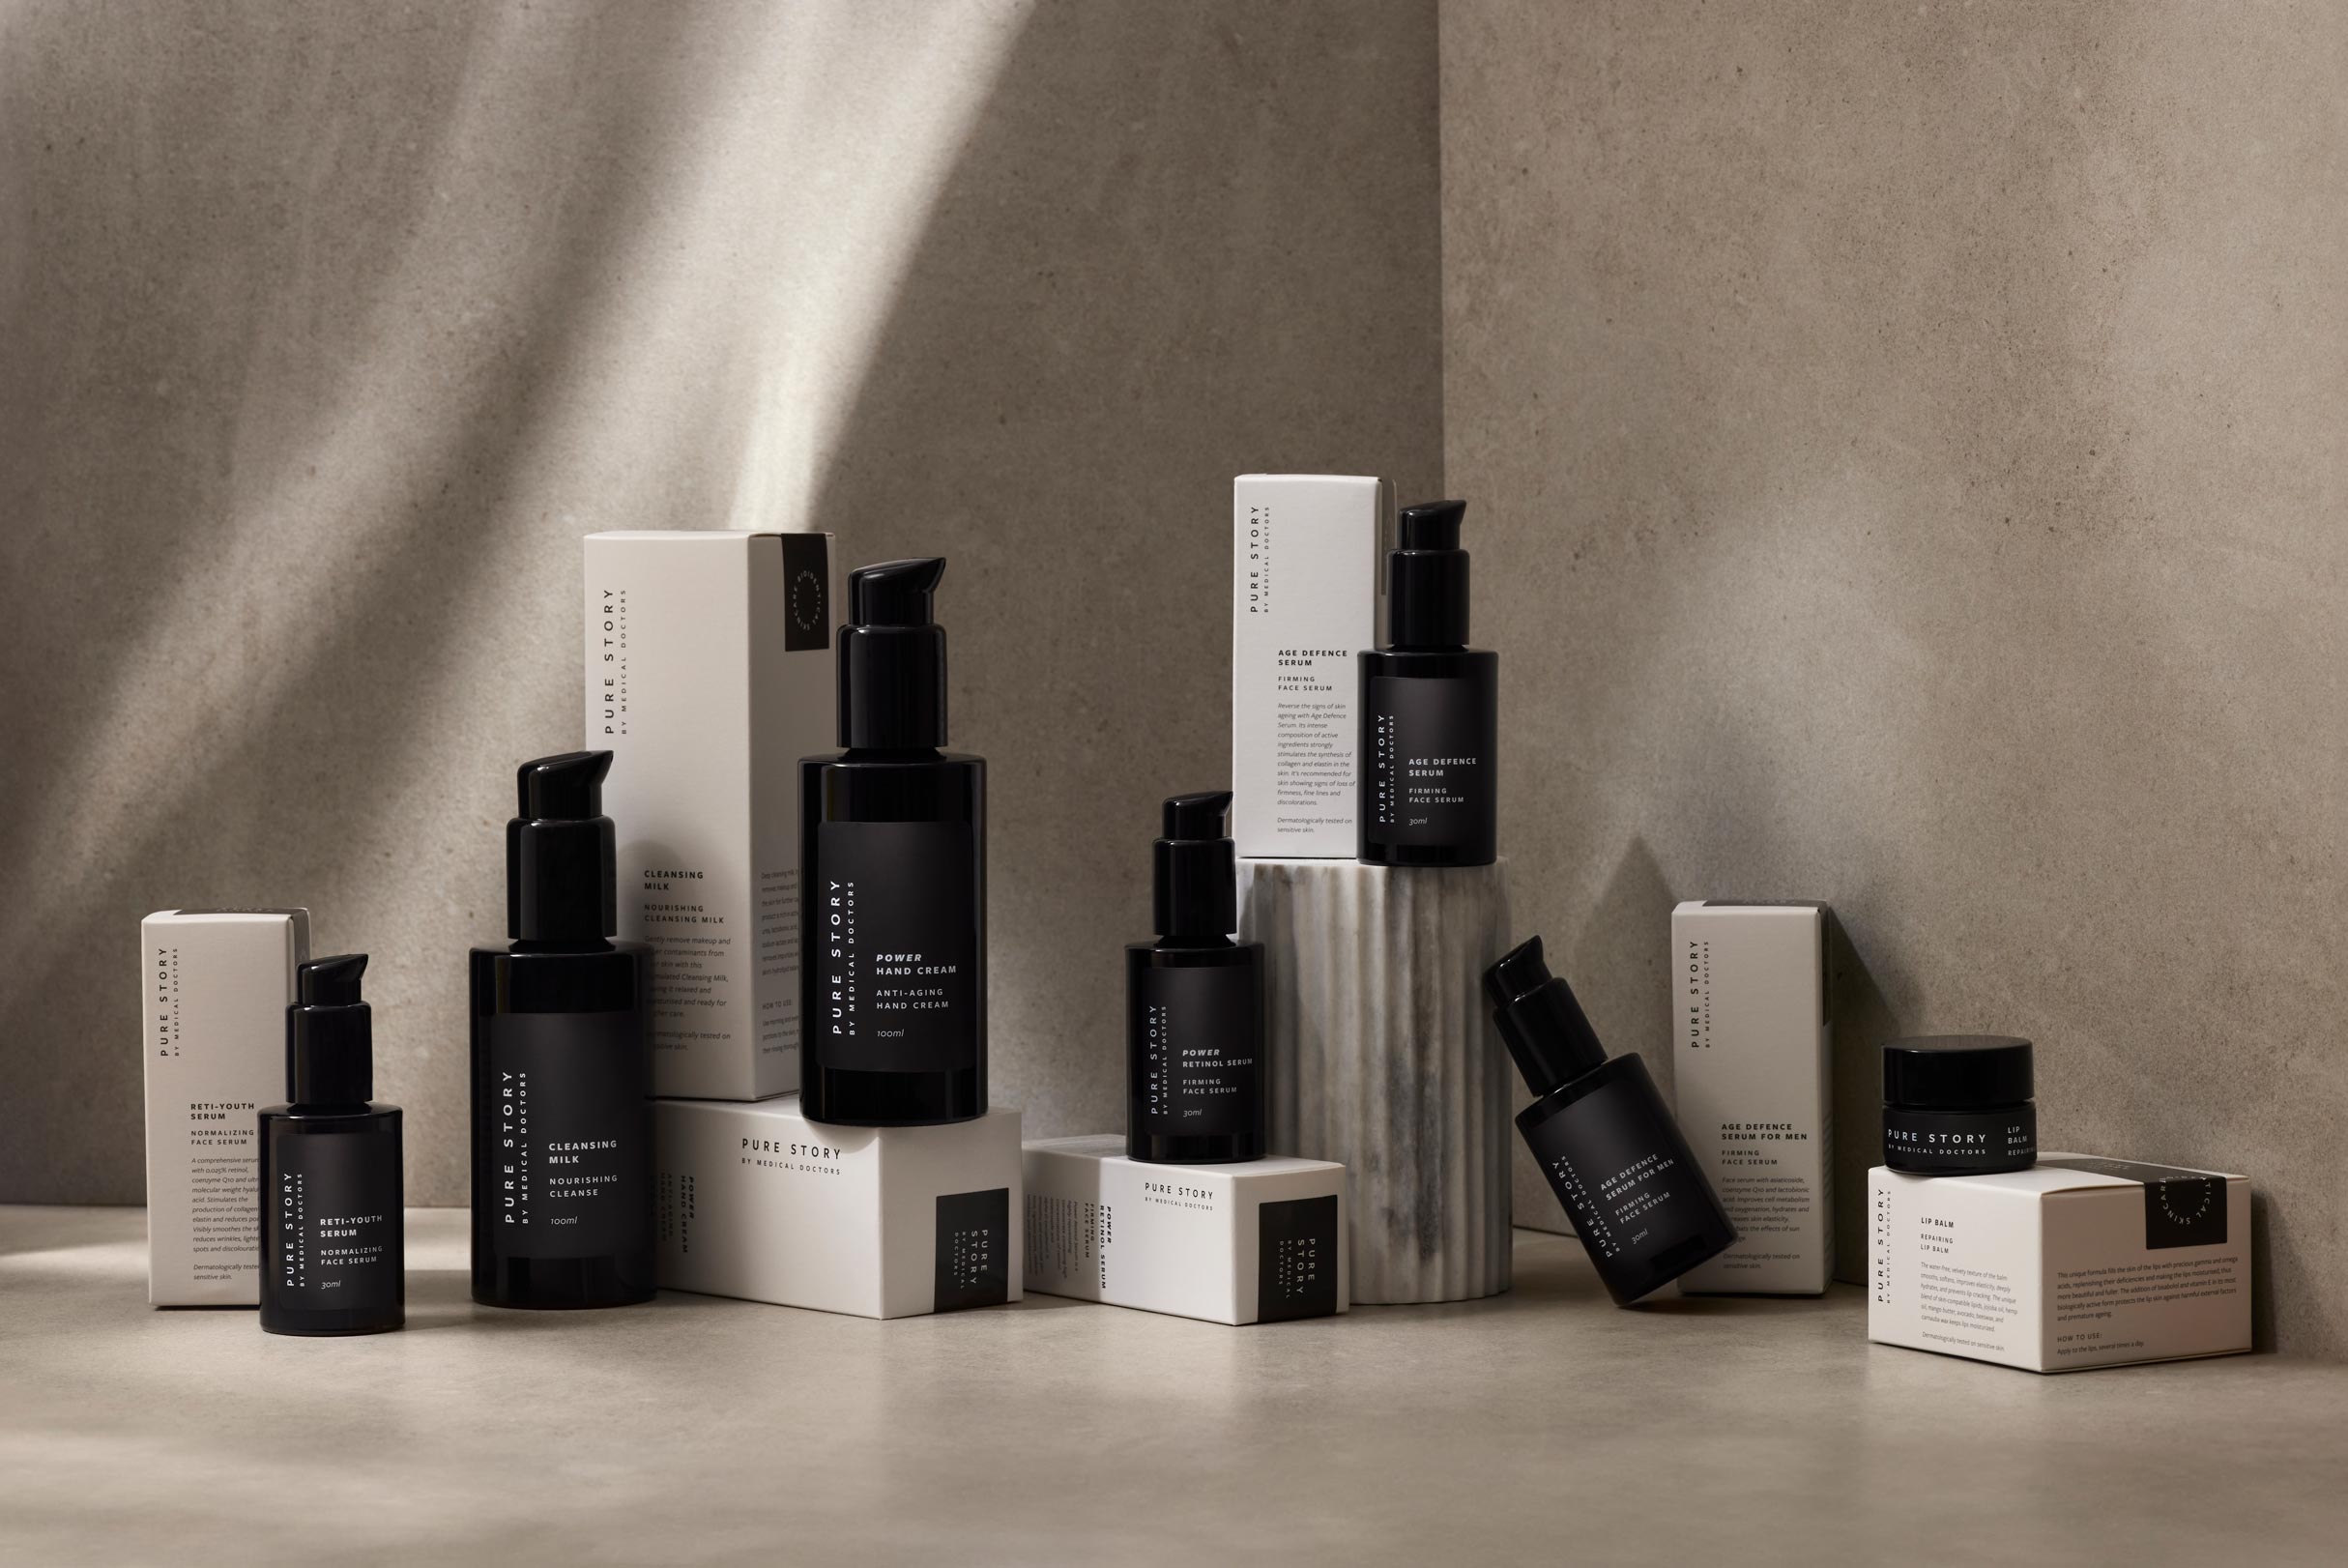 Minimalist Brand and Packaging Design for Pure Story, a Bioidentical Skincare Brand Designed by Karolina Król Studio